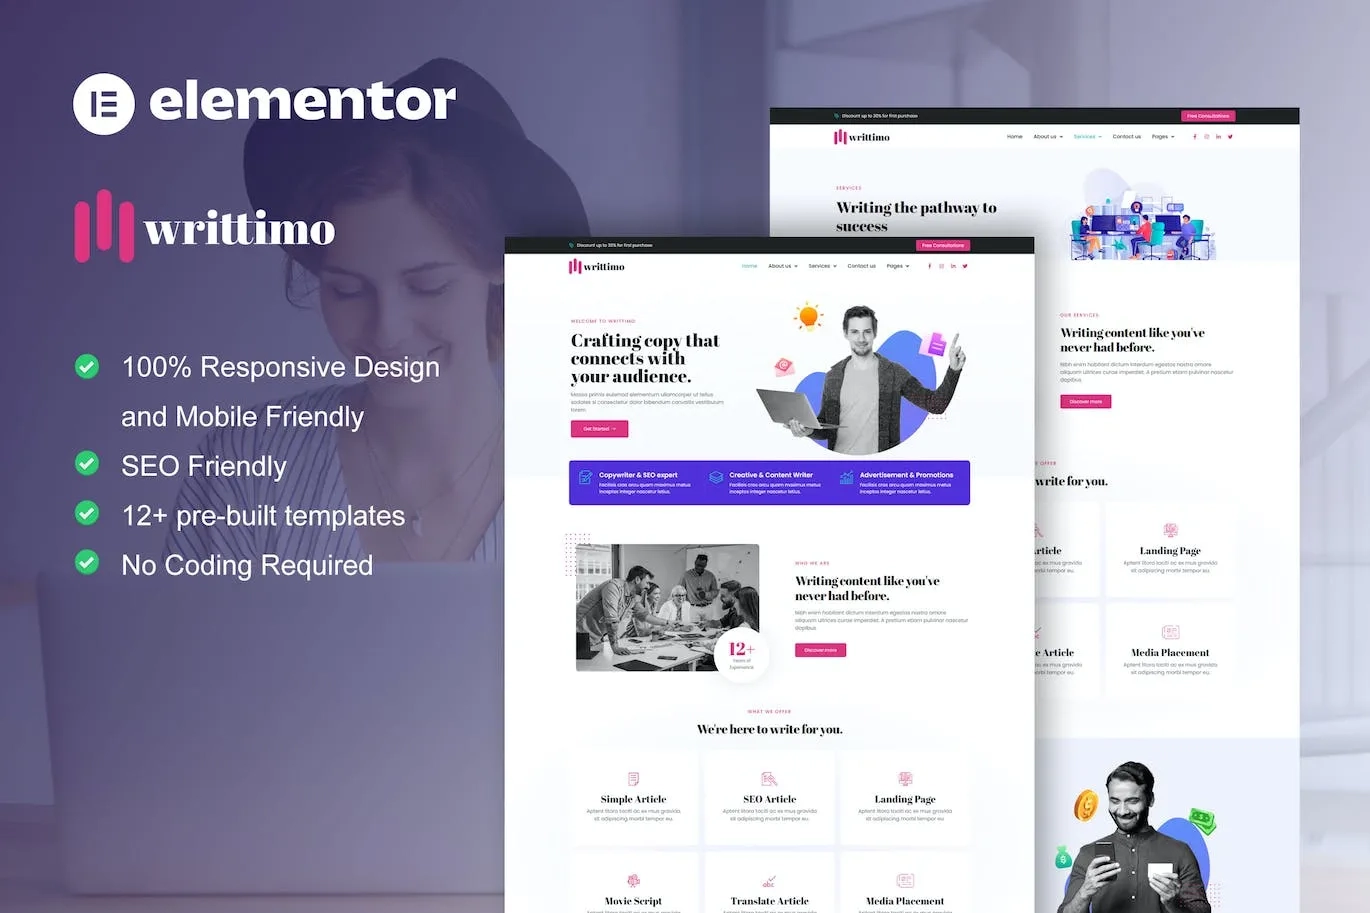 Writtimo Content Writing Service Agency Elementor Kit 97 1696946312 1